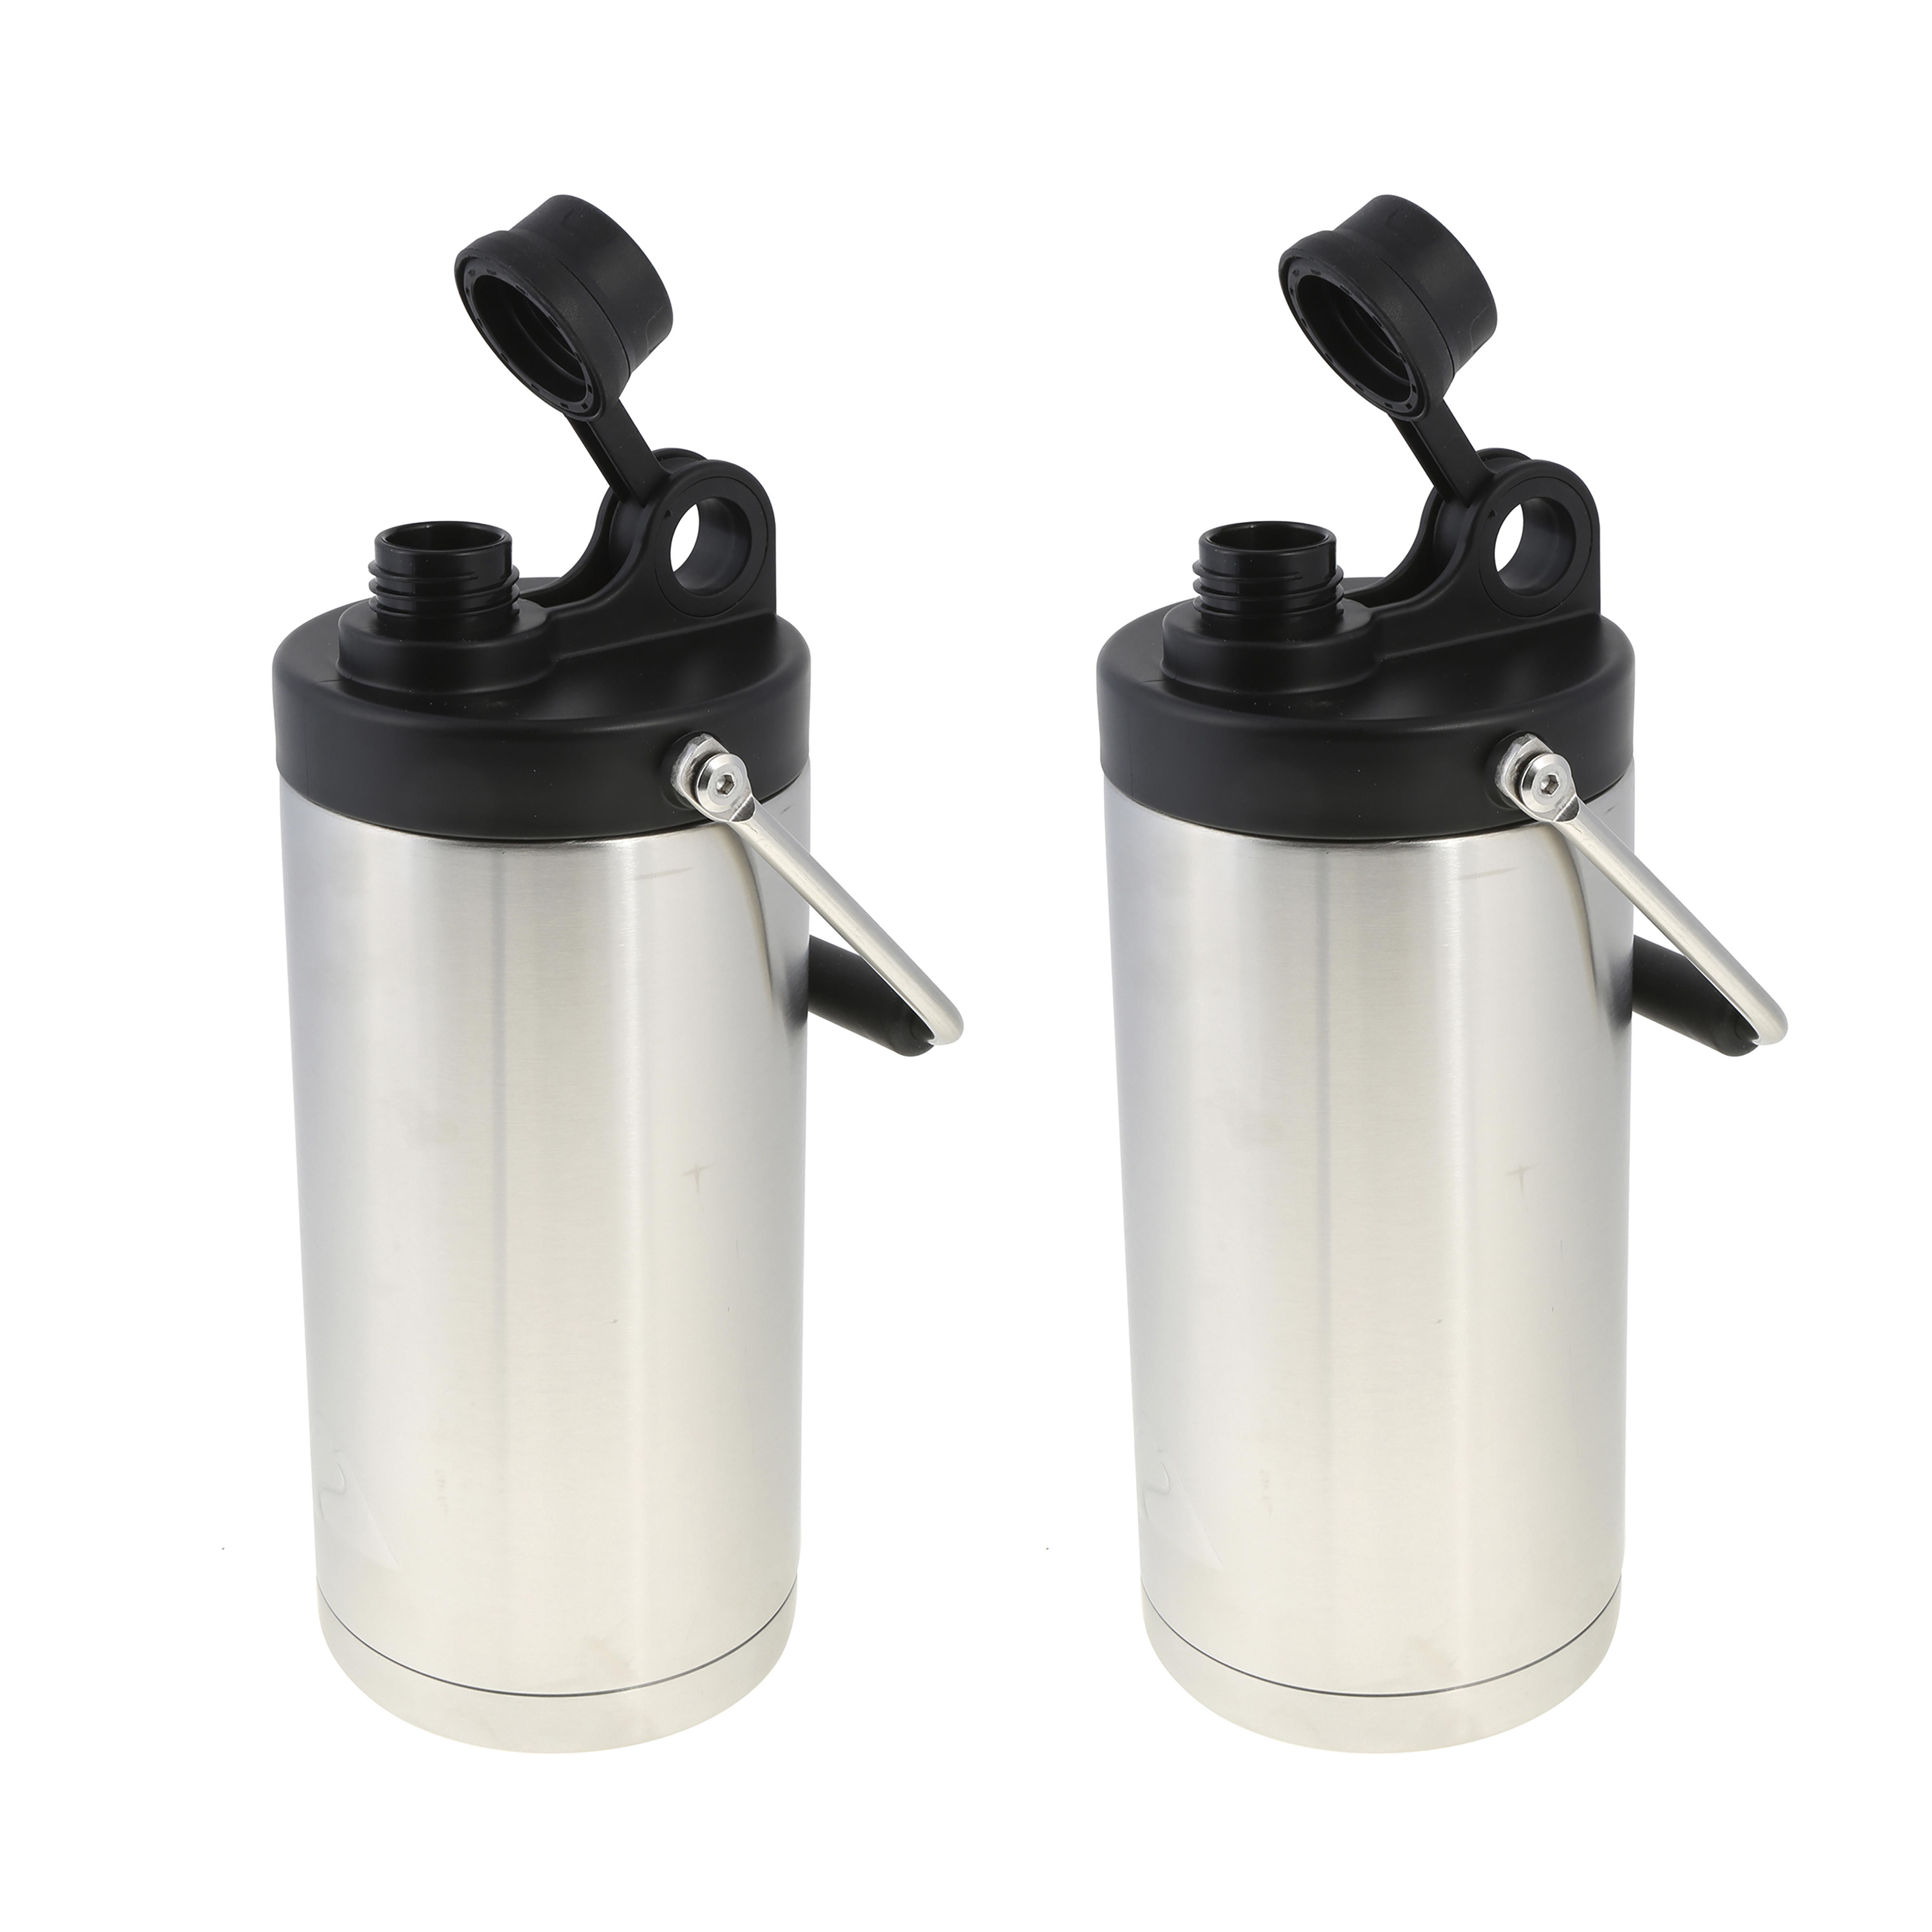 Ozark Trail 1/2 Gallon Double-wall Vacuum-sealed Stainless Steel Water Jug with new lid 2 pack - Walmart.com $19.97